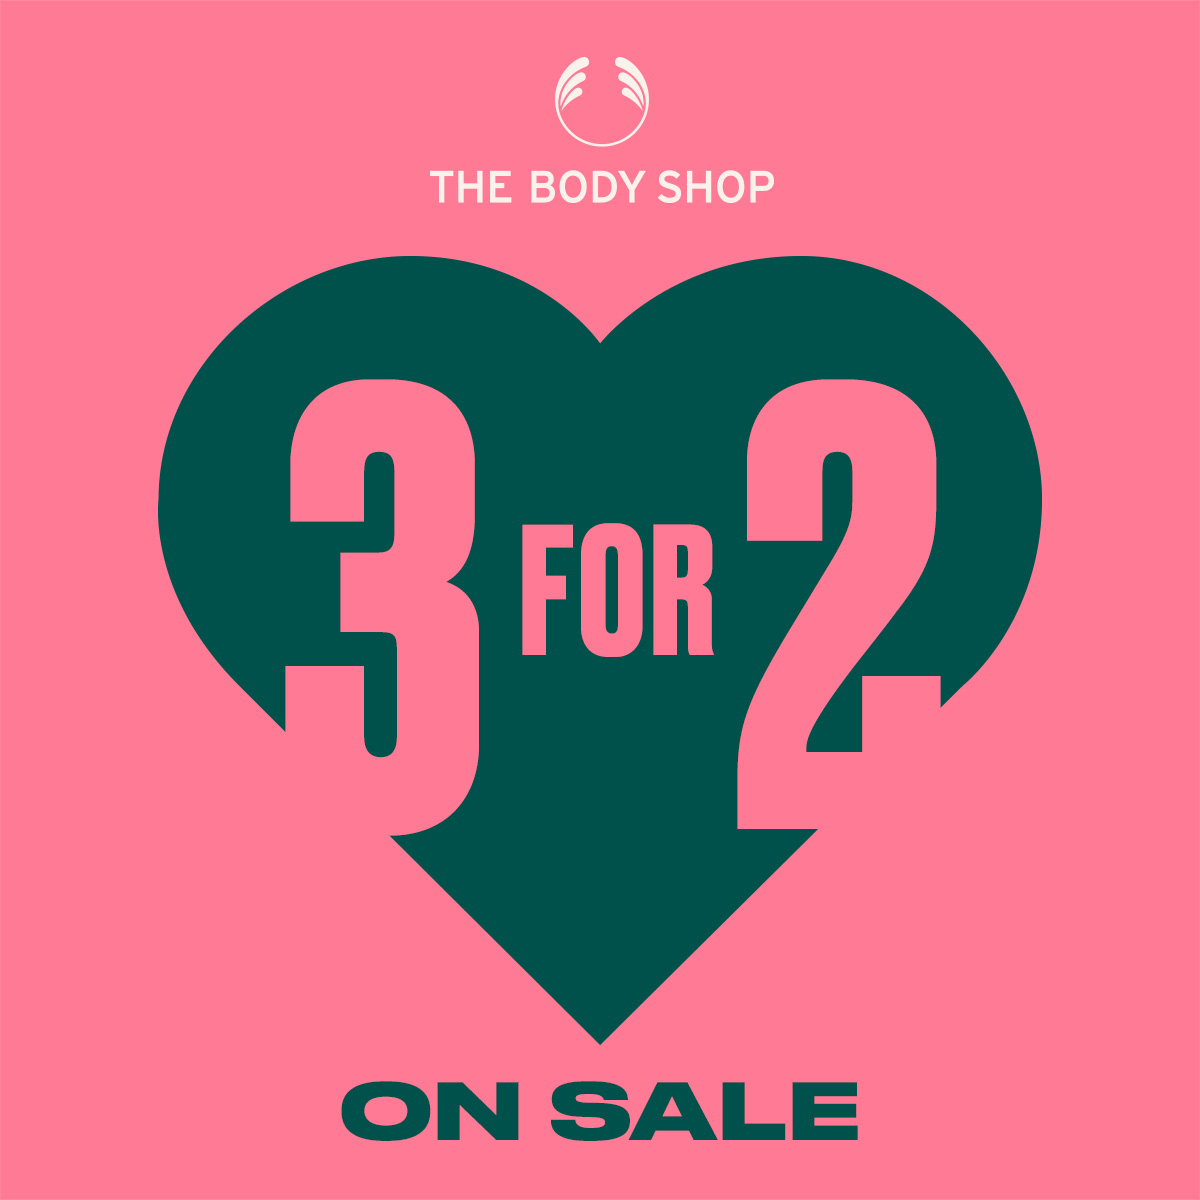 [AD]➡️ @TheBodyShopUK Self Love Summer Sale is here! Get UP TO 50% OFF* PLUS 3 for 2 on all sale items❤️! #TBSAFF SHOP NOW - tidd.ly/3qsa6jg 😍😍 #affiliatelink #thebodyshop #summersale #selflove #selfcare #beautydeals